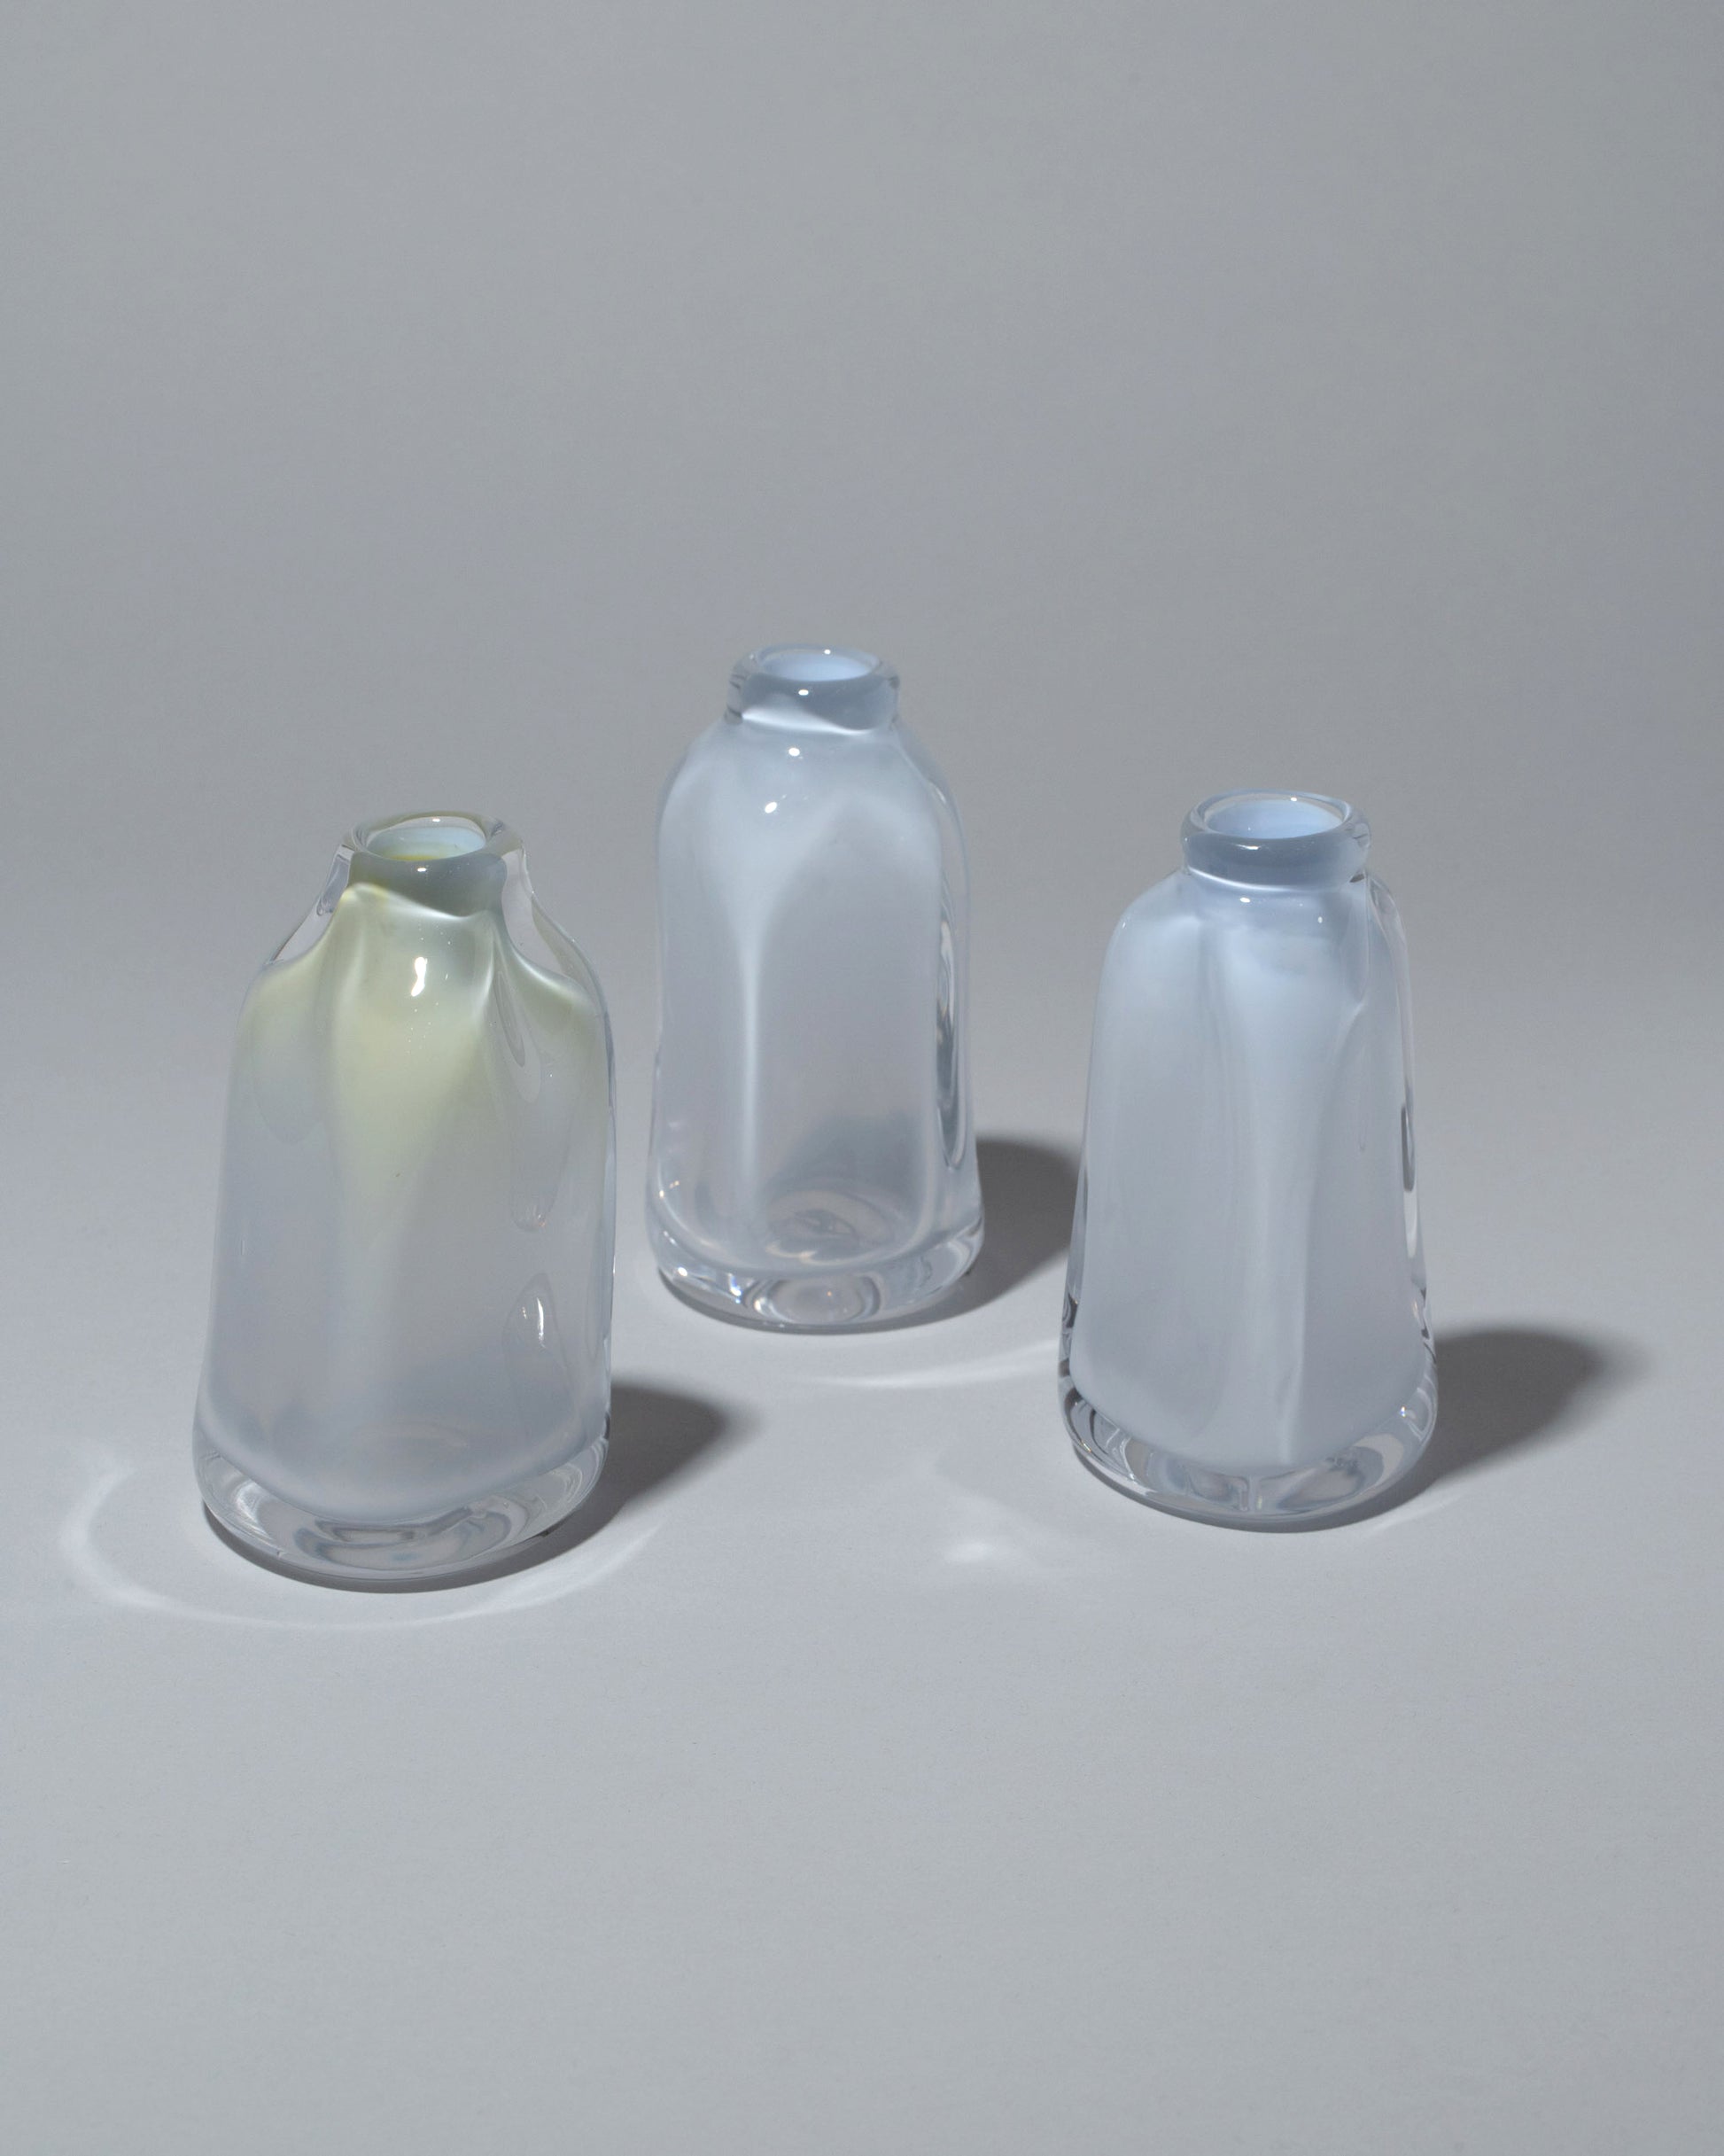 Group of BaleFire Glass Small Cloud Suspension Vases on light color background.